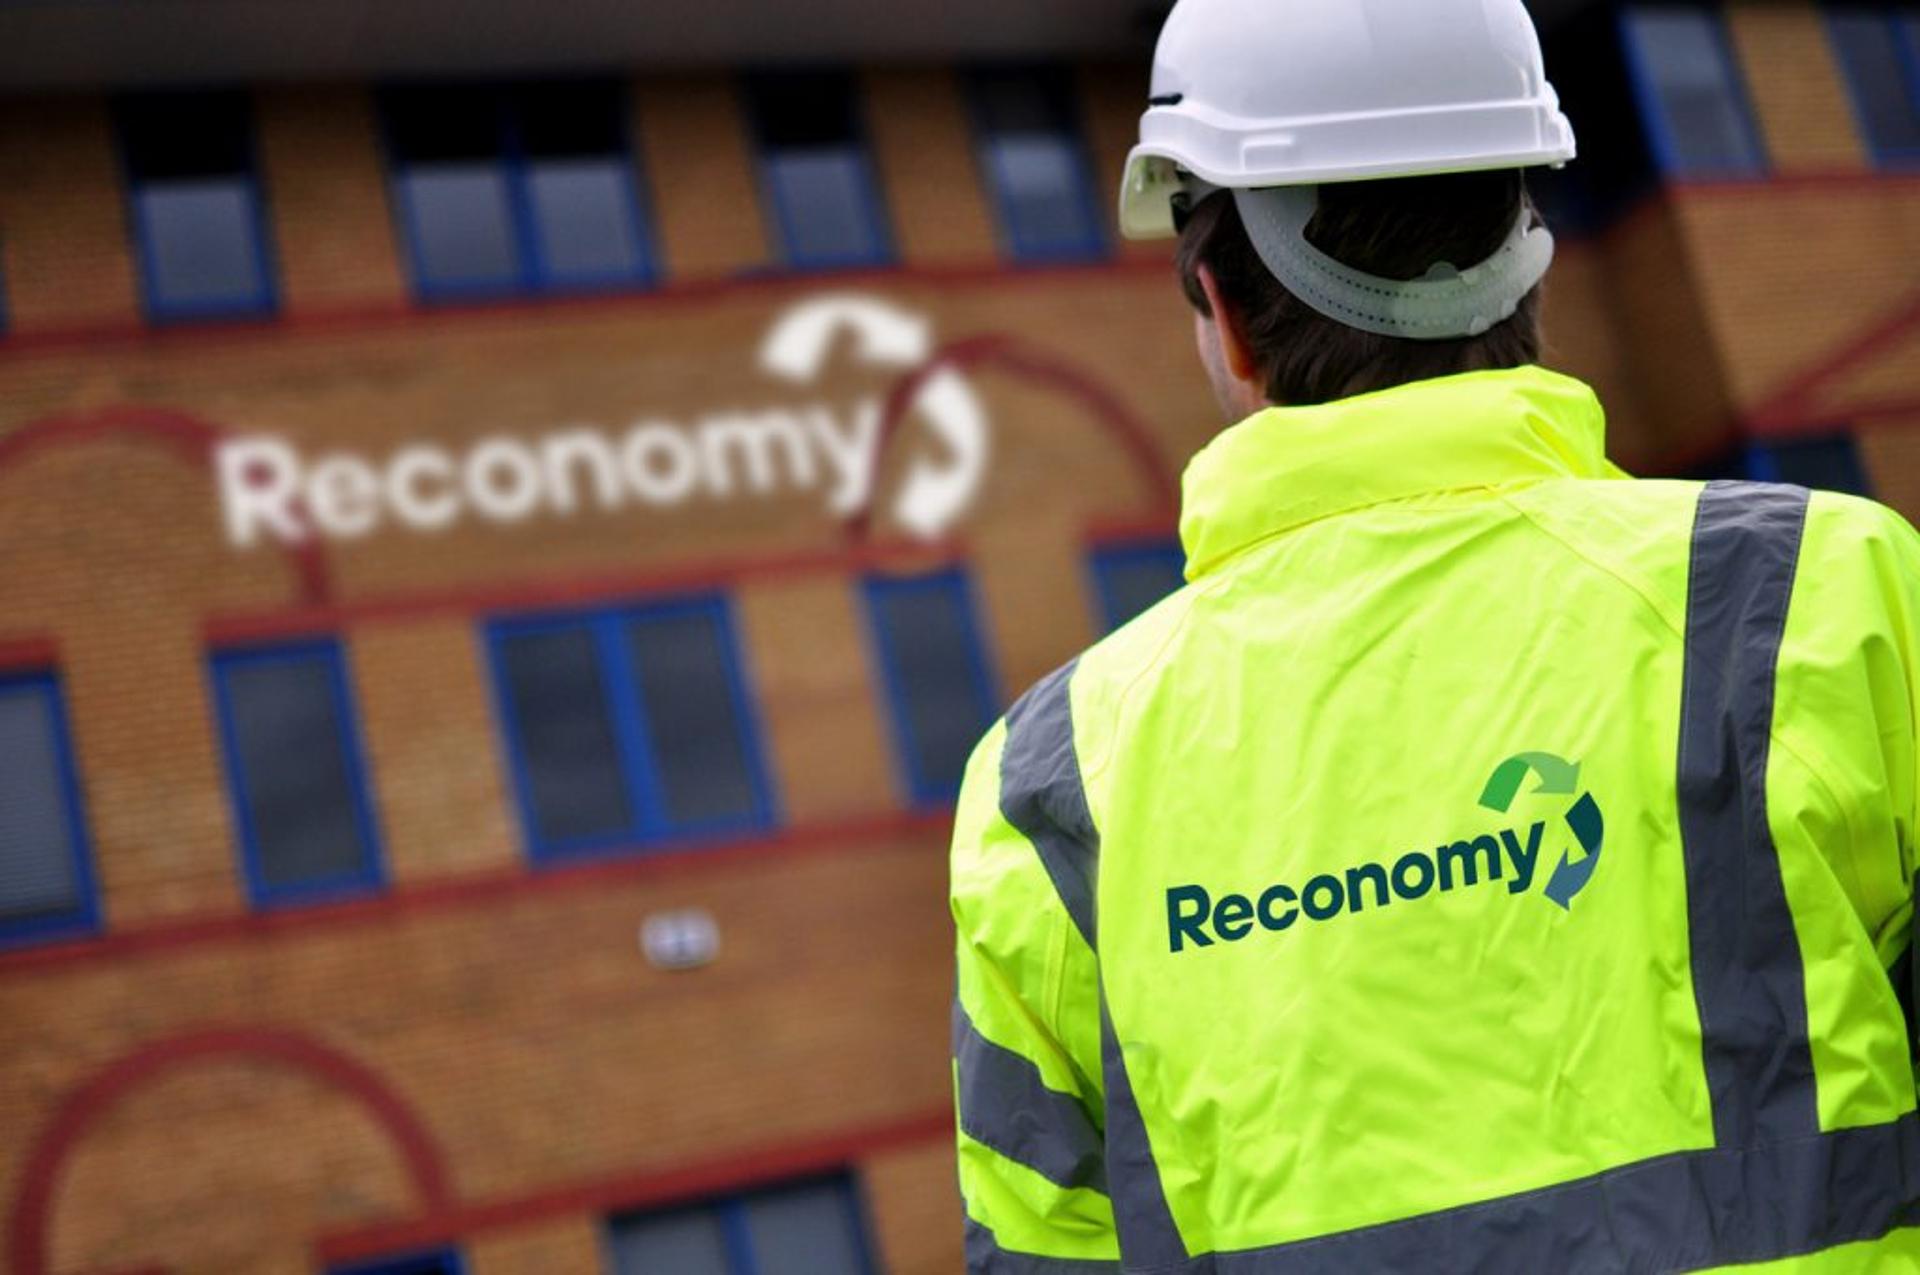 Circular economy group expands with UK takeover